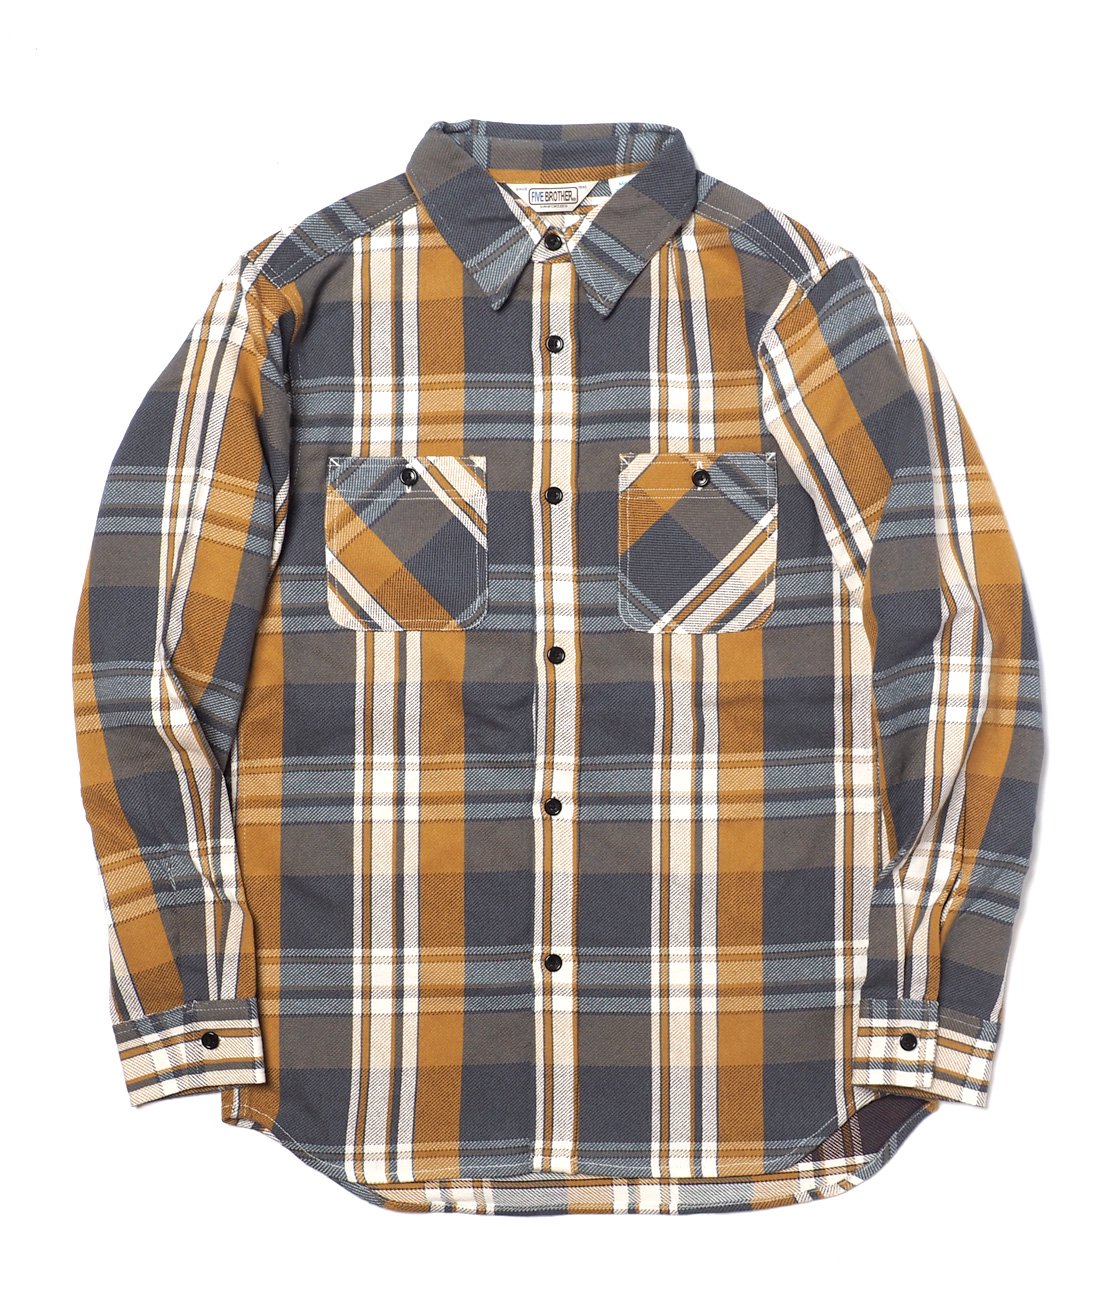 FIVE BROTHER】HEAVY FLANNEL WORK SHIRT - YELLOW CHECK ネルシャツ